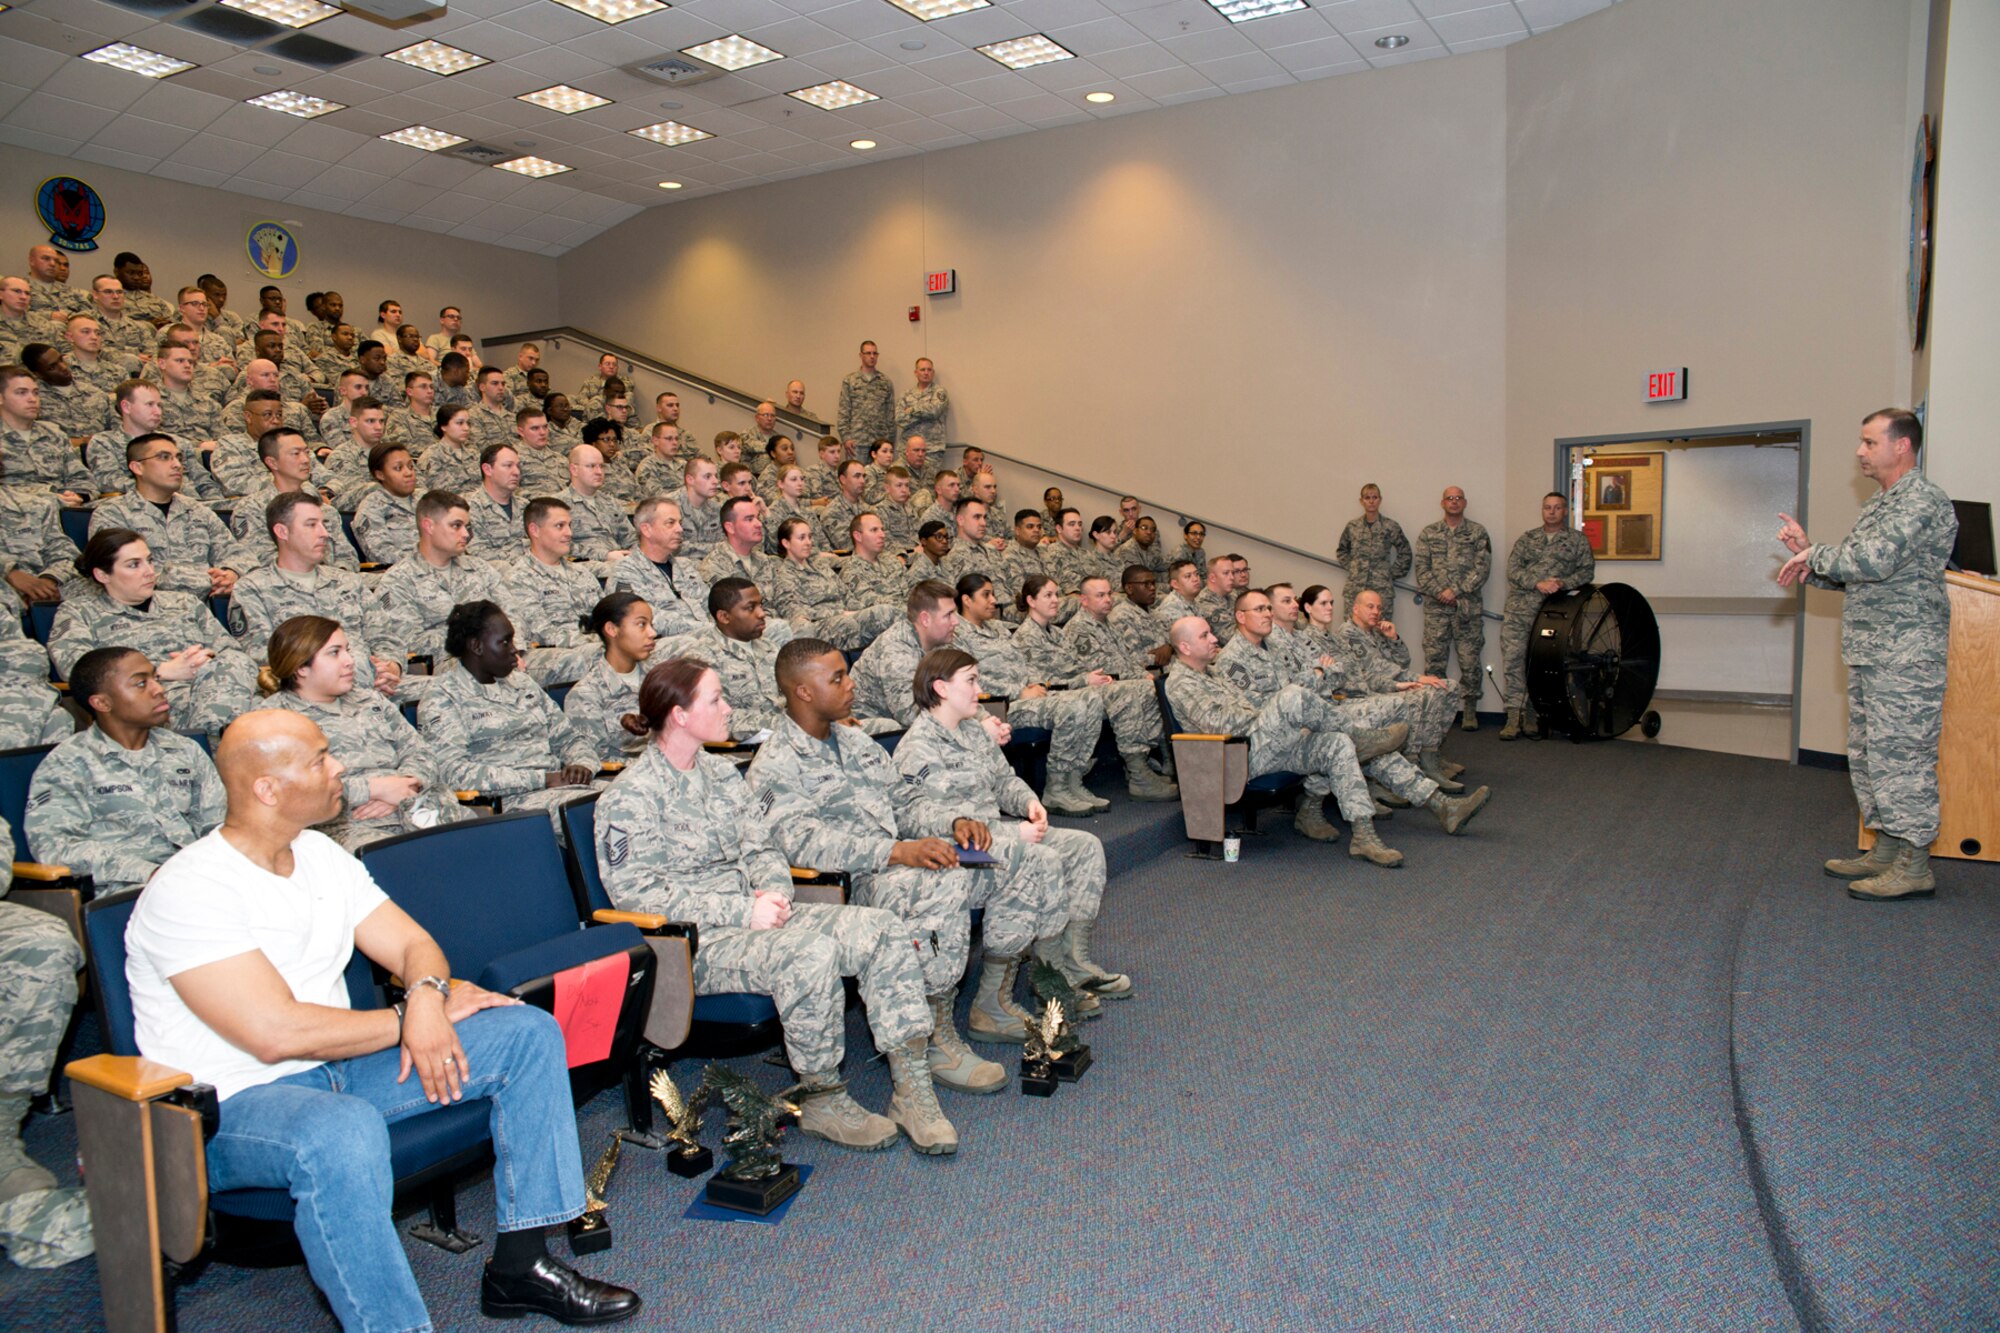 U.S. Air Force Reserve Col. Craig Drescher, commander, 913th Airlift Group, addresses members of the 913th Maintenance and Force Support Squadrons during a Commander’s Call at Little Rock Air Force Base, Ark., Mar. 13, 2016. A commander’s call is a gathering of personnel under that commanding officer, where awards are presented and pertinent information can be disseminated and discussed.  (U.S. Air Force photo by Master Sgt. Jeff Walston/Released)